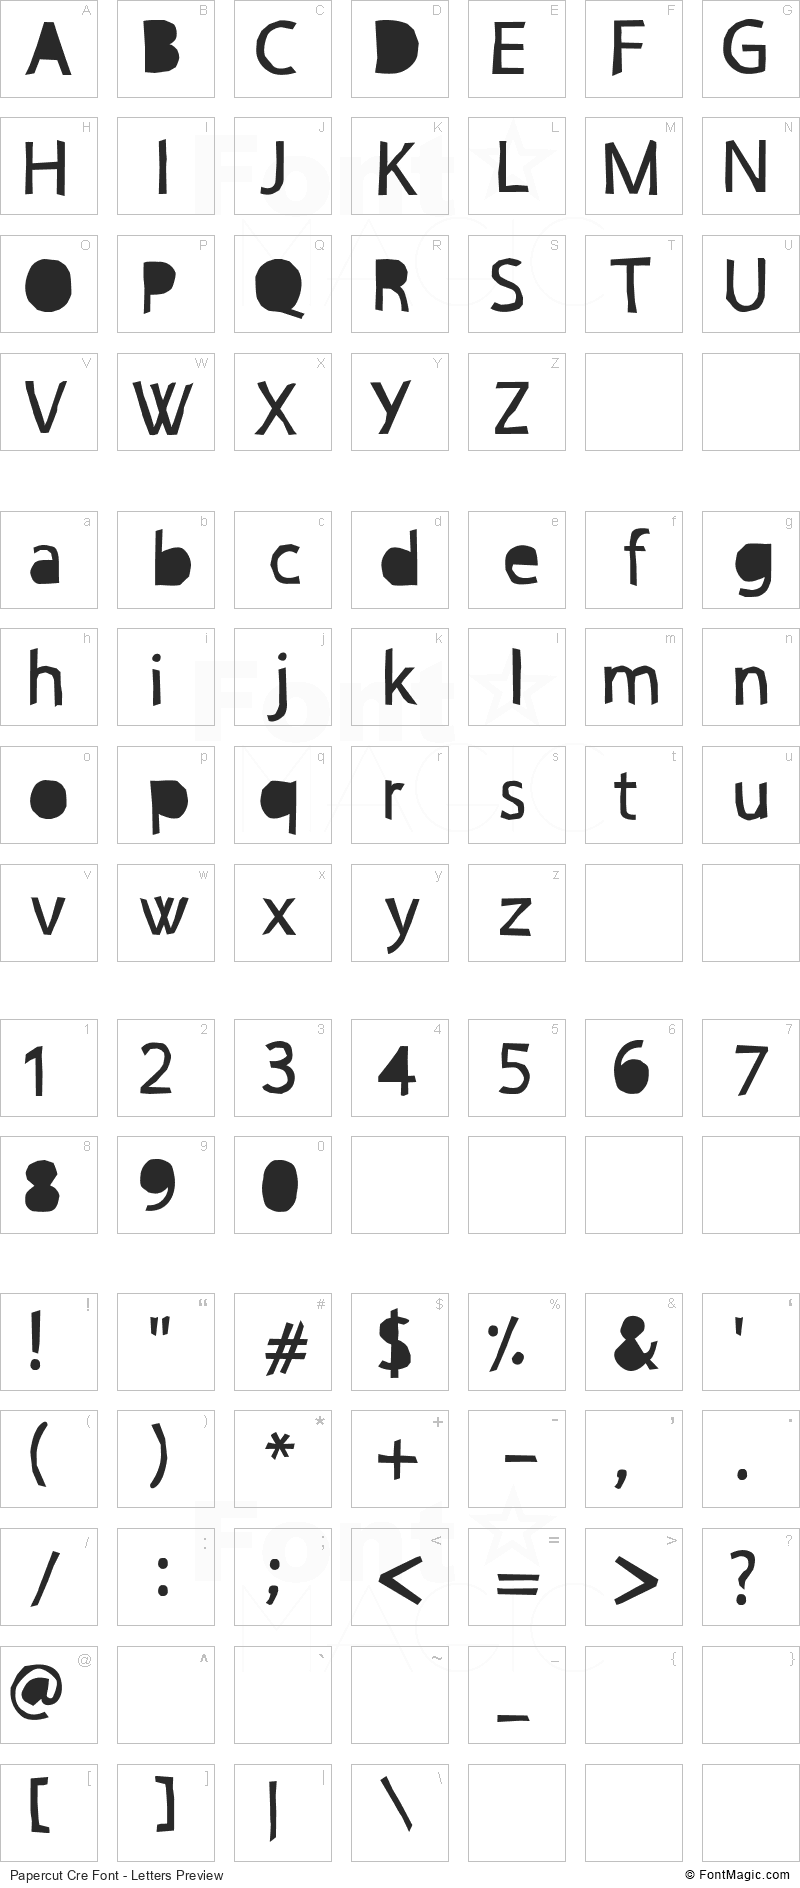 Papercut Cre Font - All Latters Preview Chart